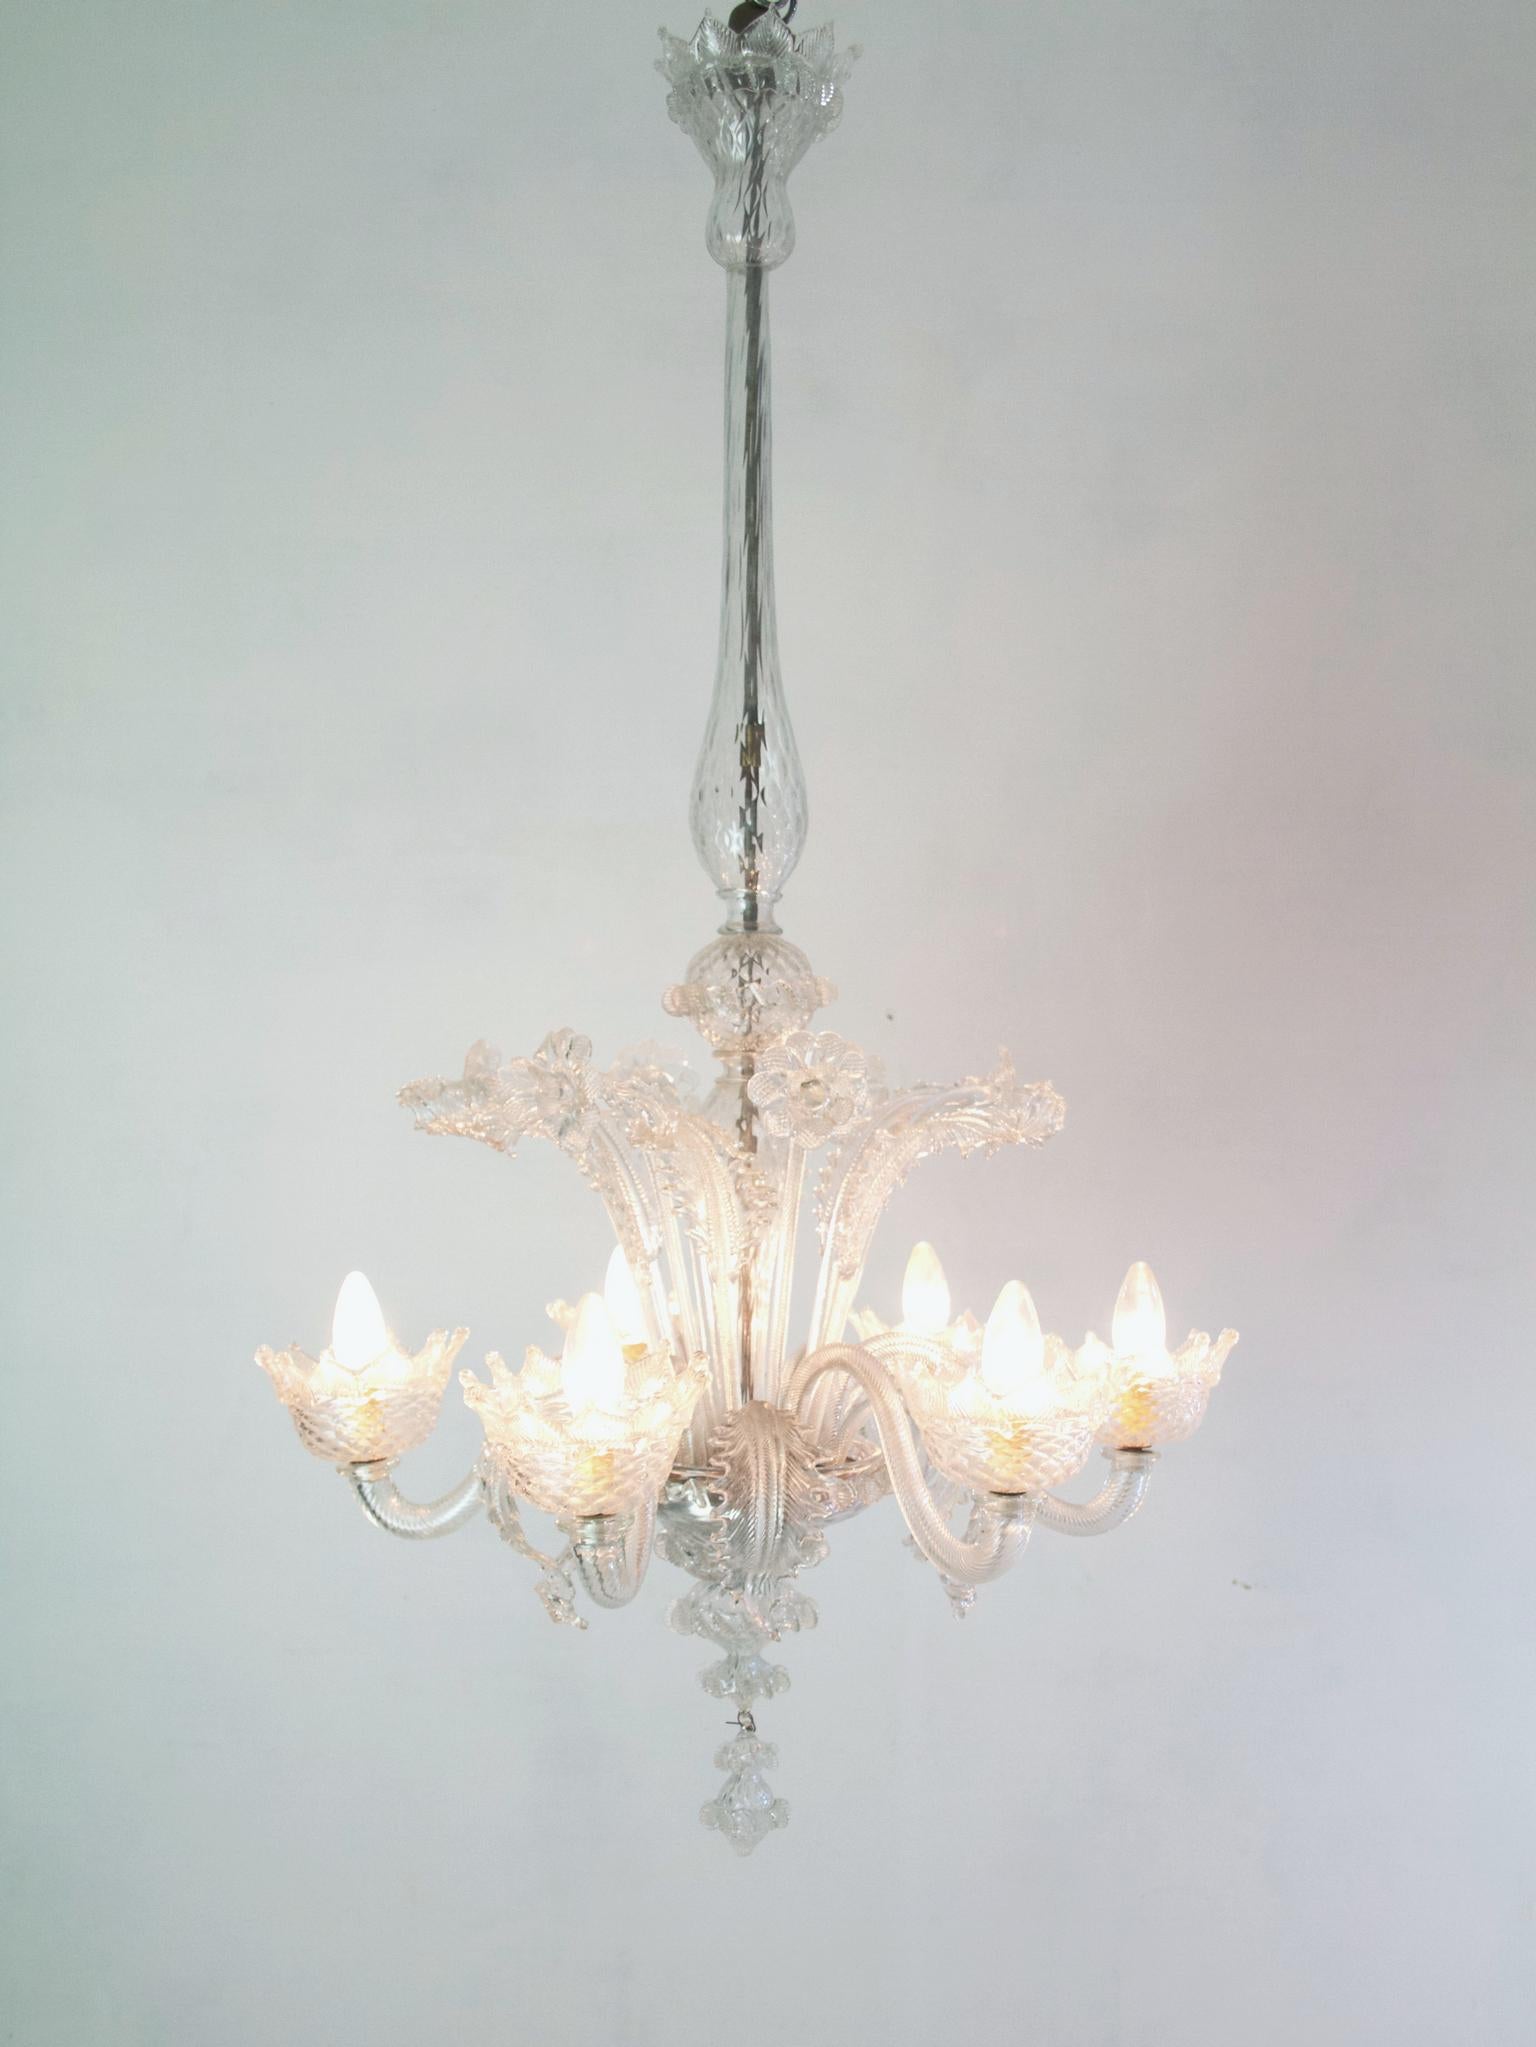 This is a very nice and a bit unusual example of a classical chandelier from Murano in the Venetian style in clear glass with six arms for lights. It is a bit unusual because it can be hung two different ways, either short at 80 cm or tall at 125